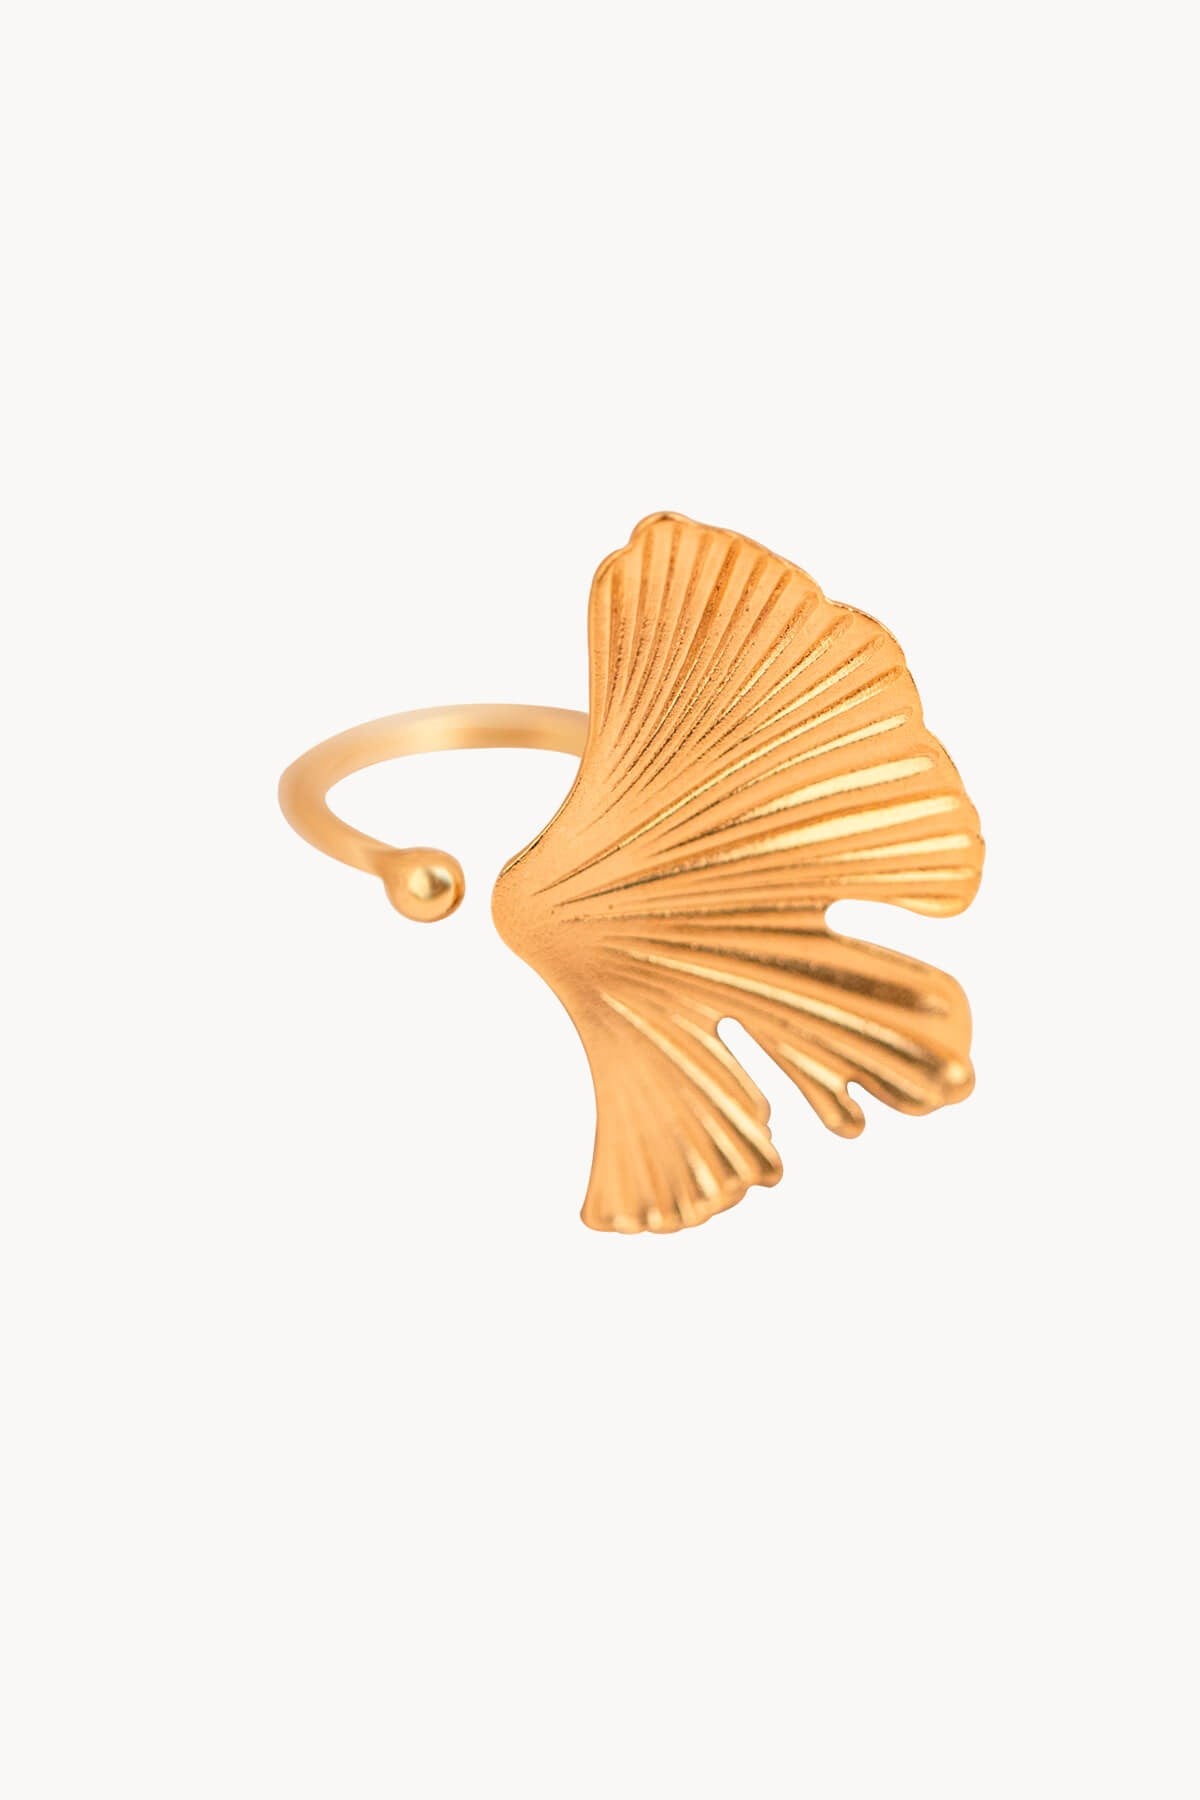 Ginkgo Biloba Leaf Ring Small Gold Plated